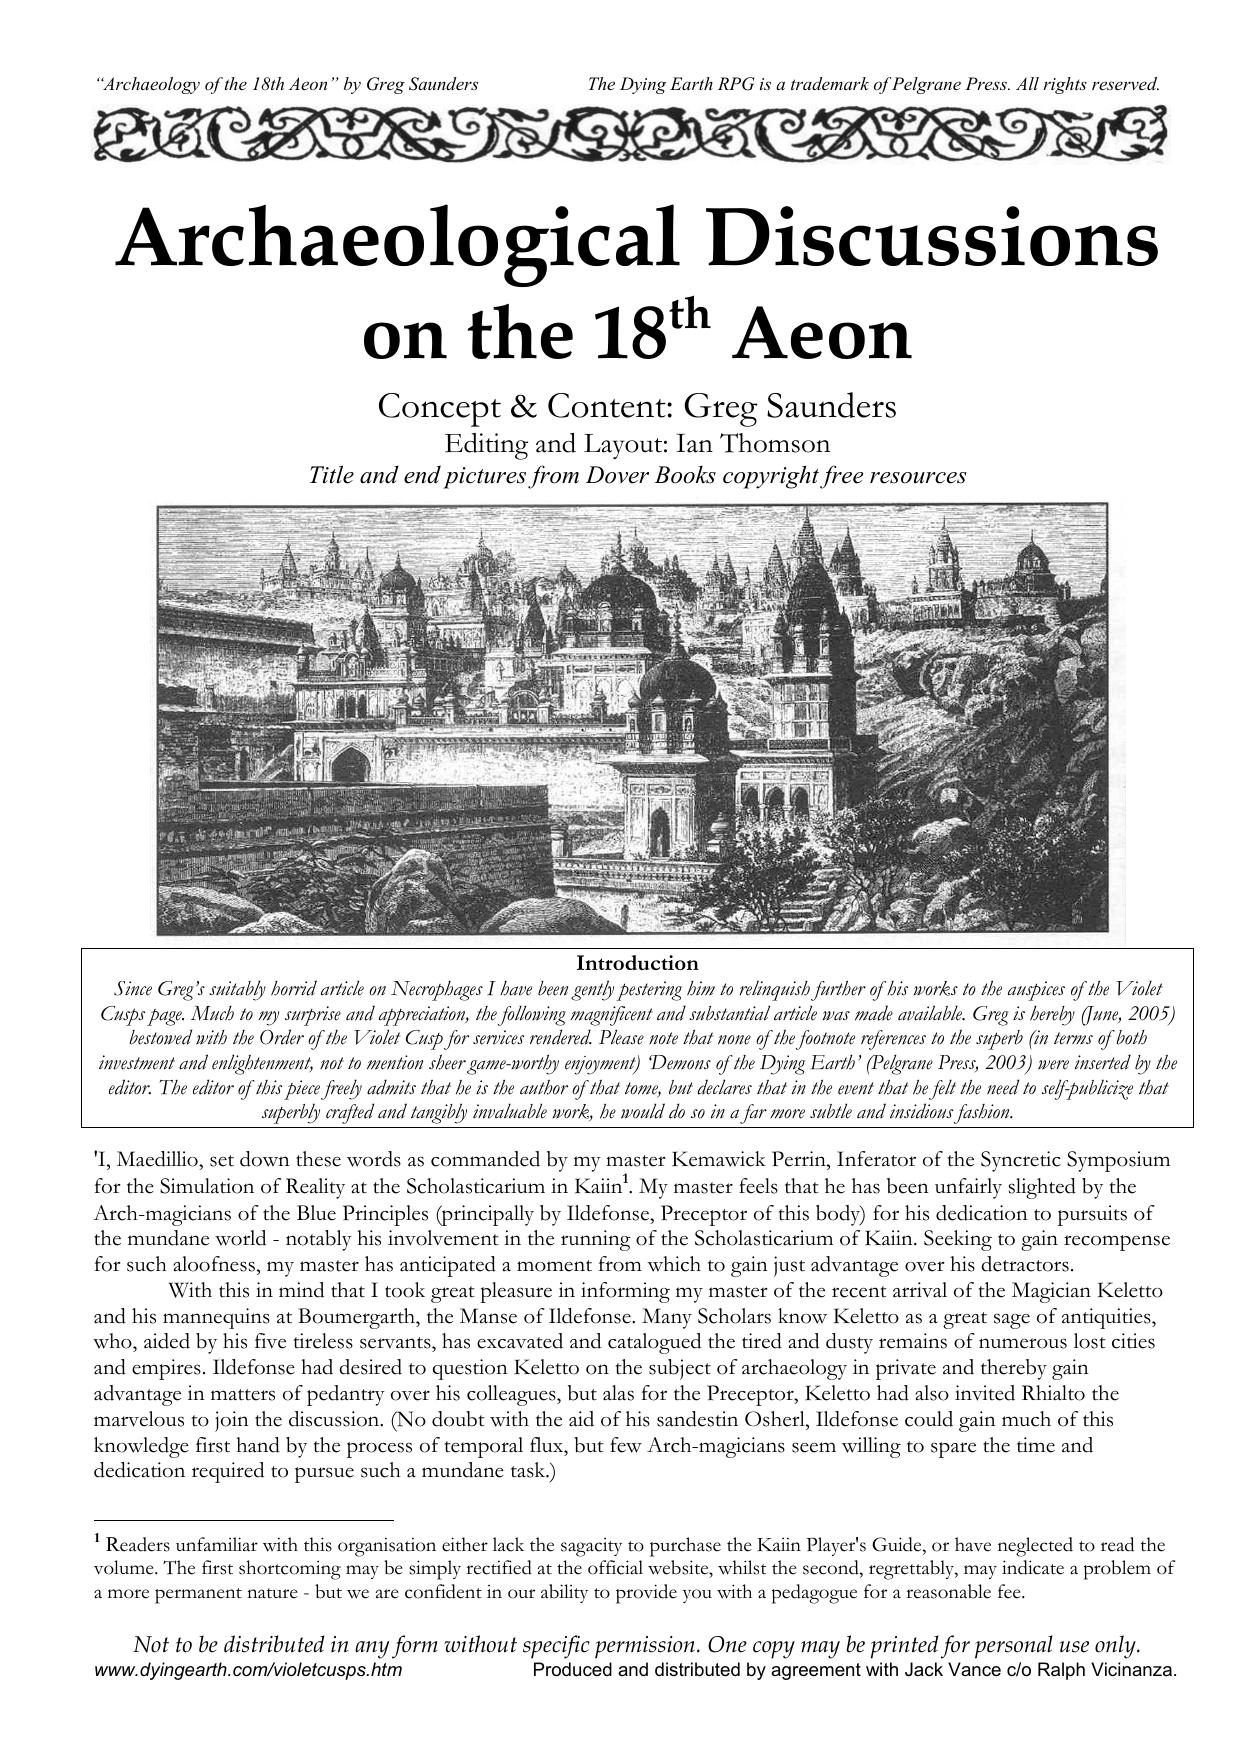 Archeological Discussion of the 18th Aeon